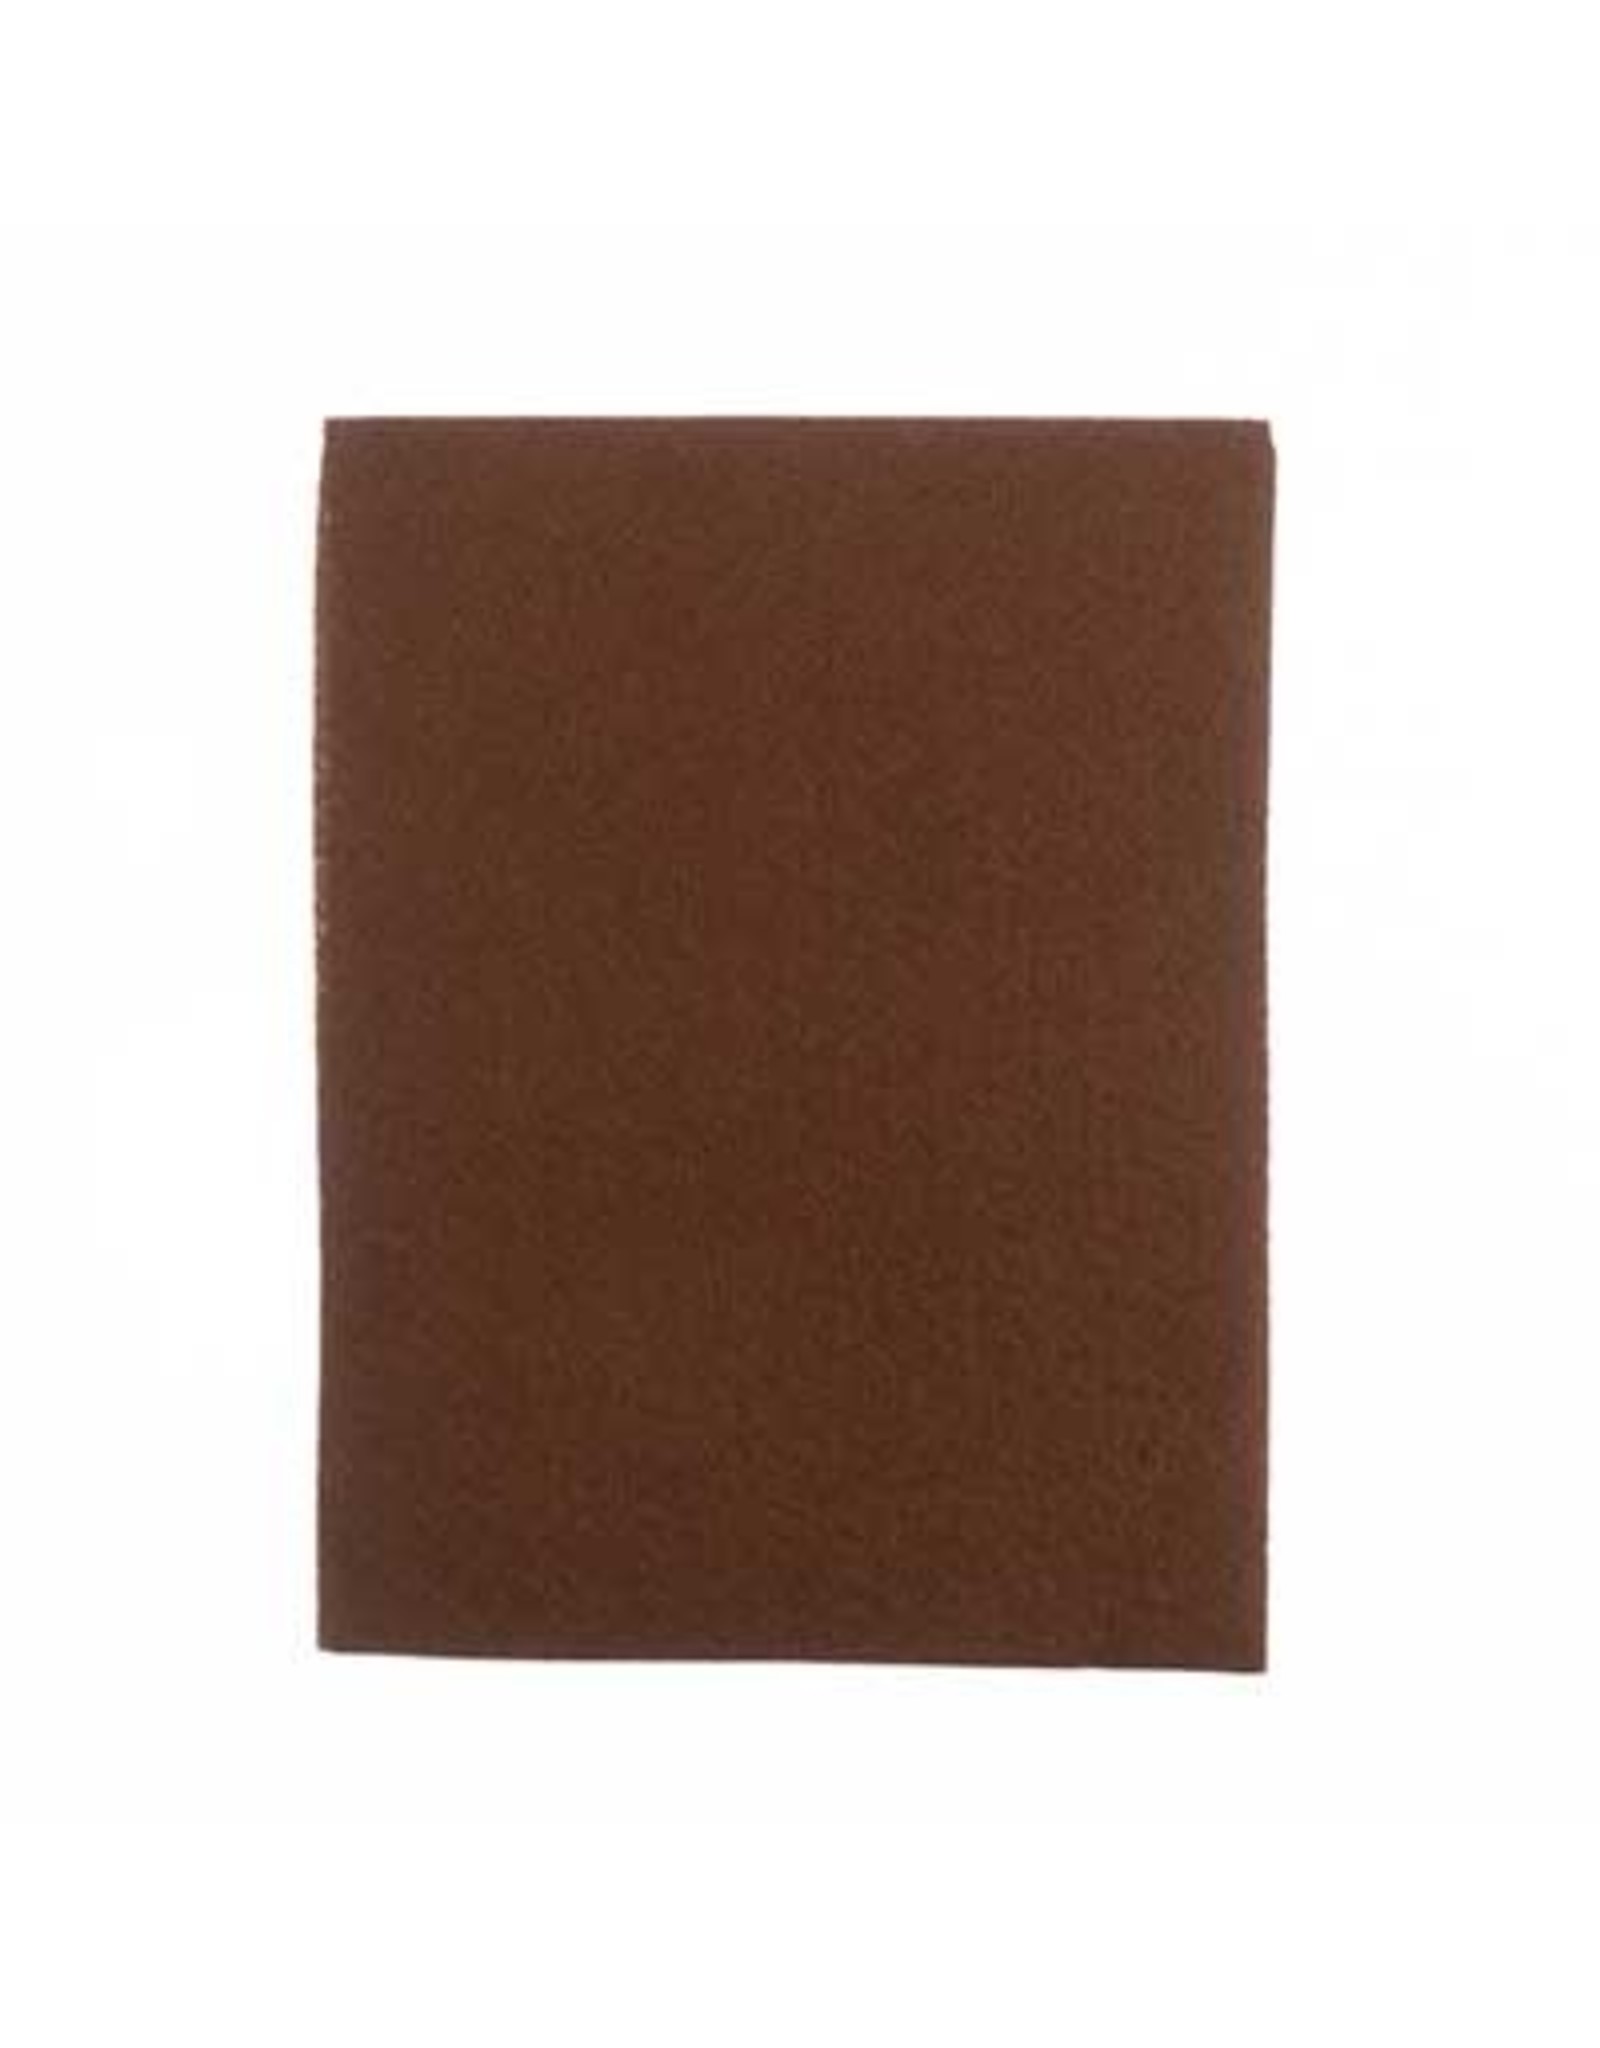 Felt Beading Foundation Brown 1.5mm thick 8.5x11"